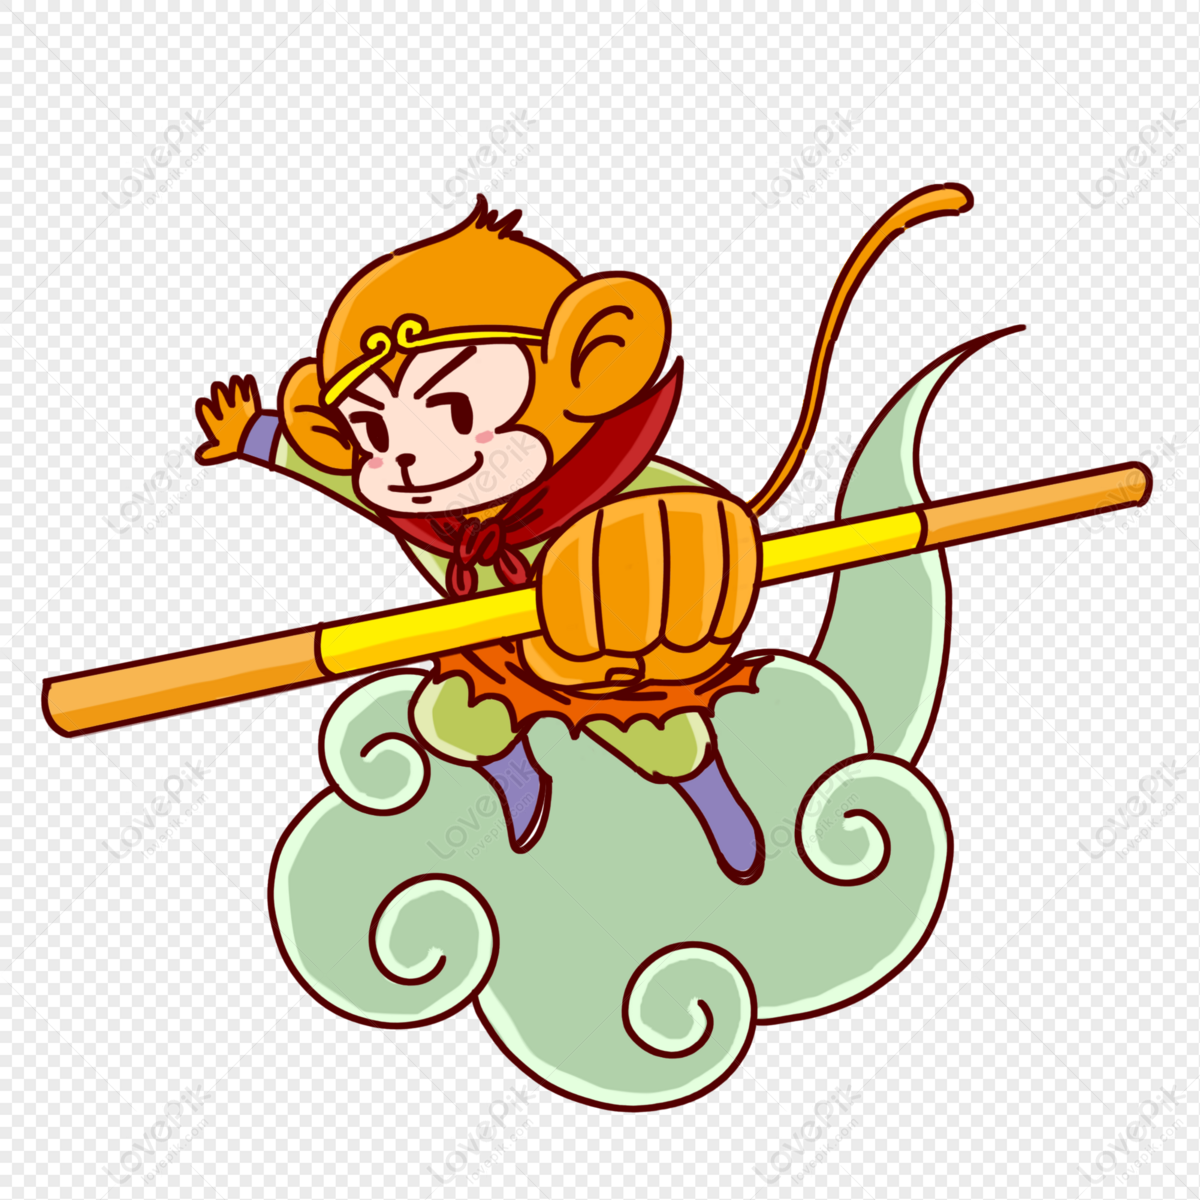 Journey to the West, Monkey King, free materials, journey to the west, monkey png transparent background